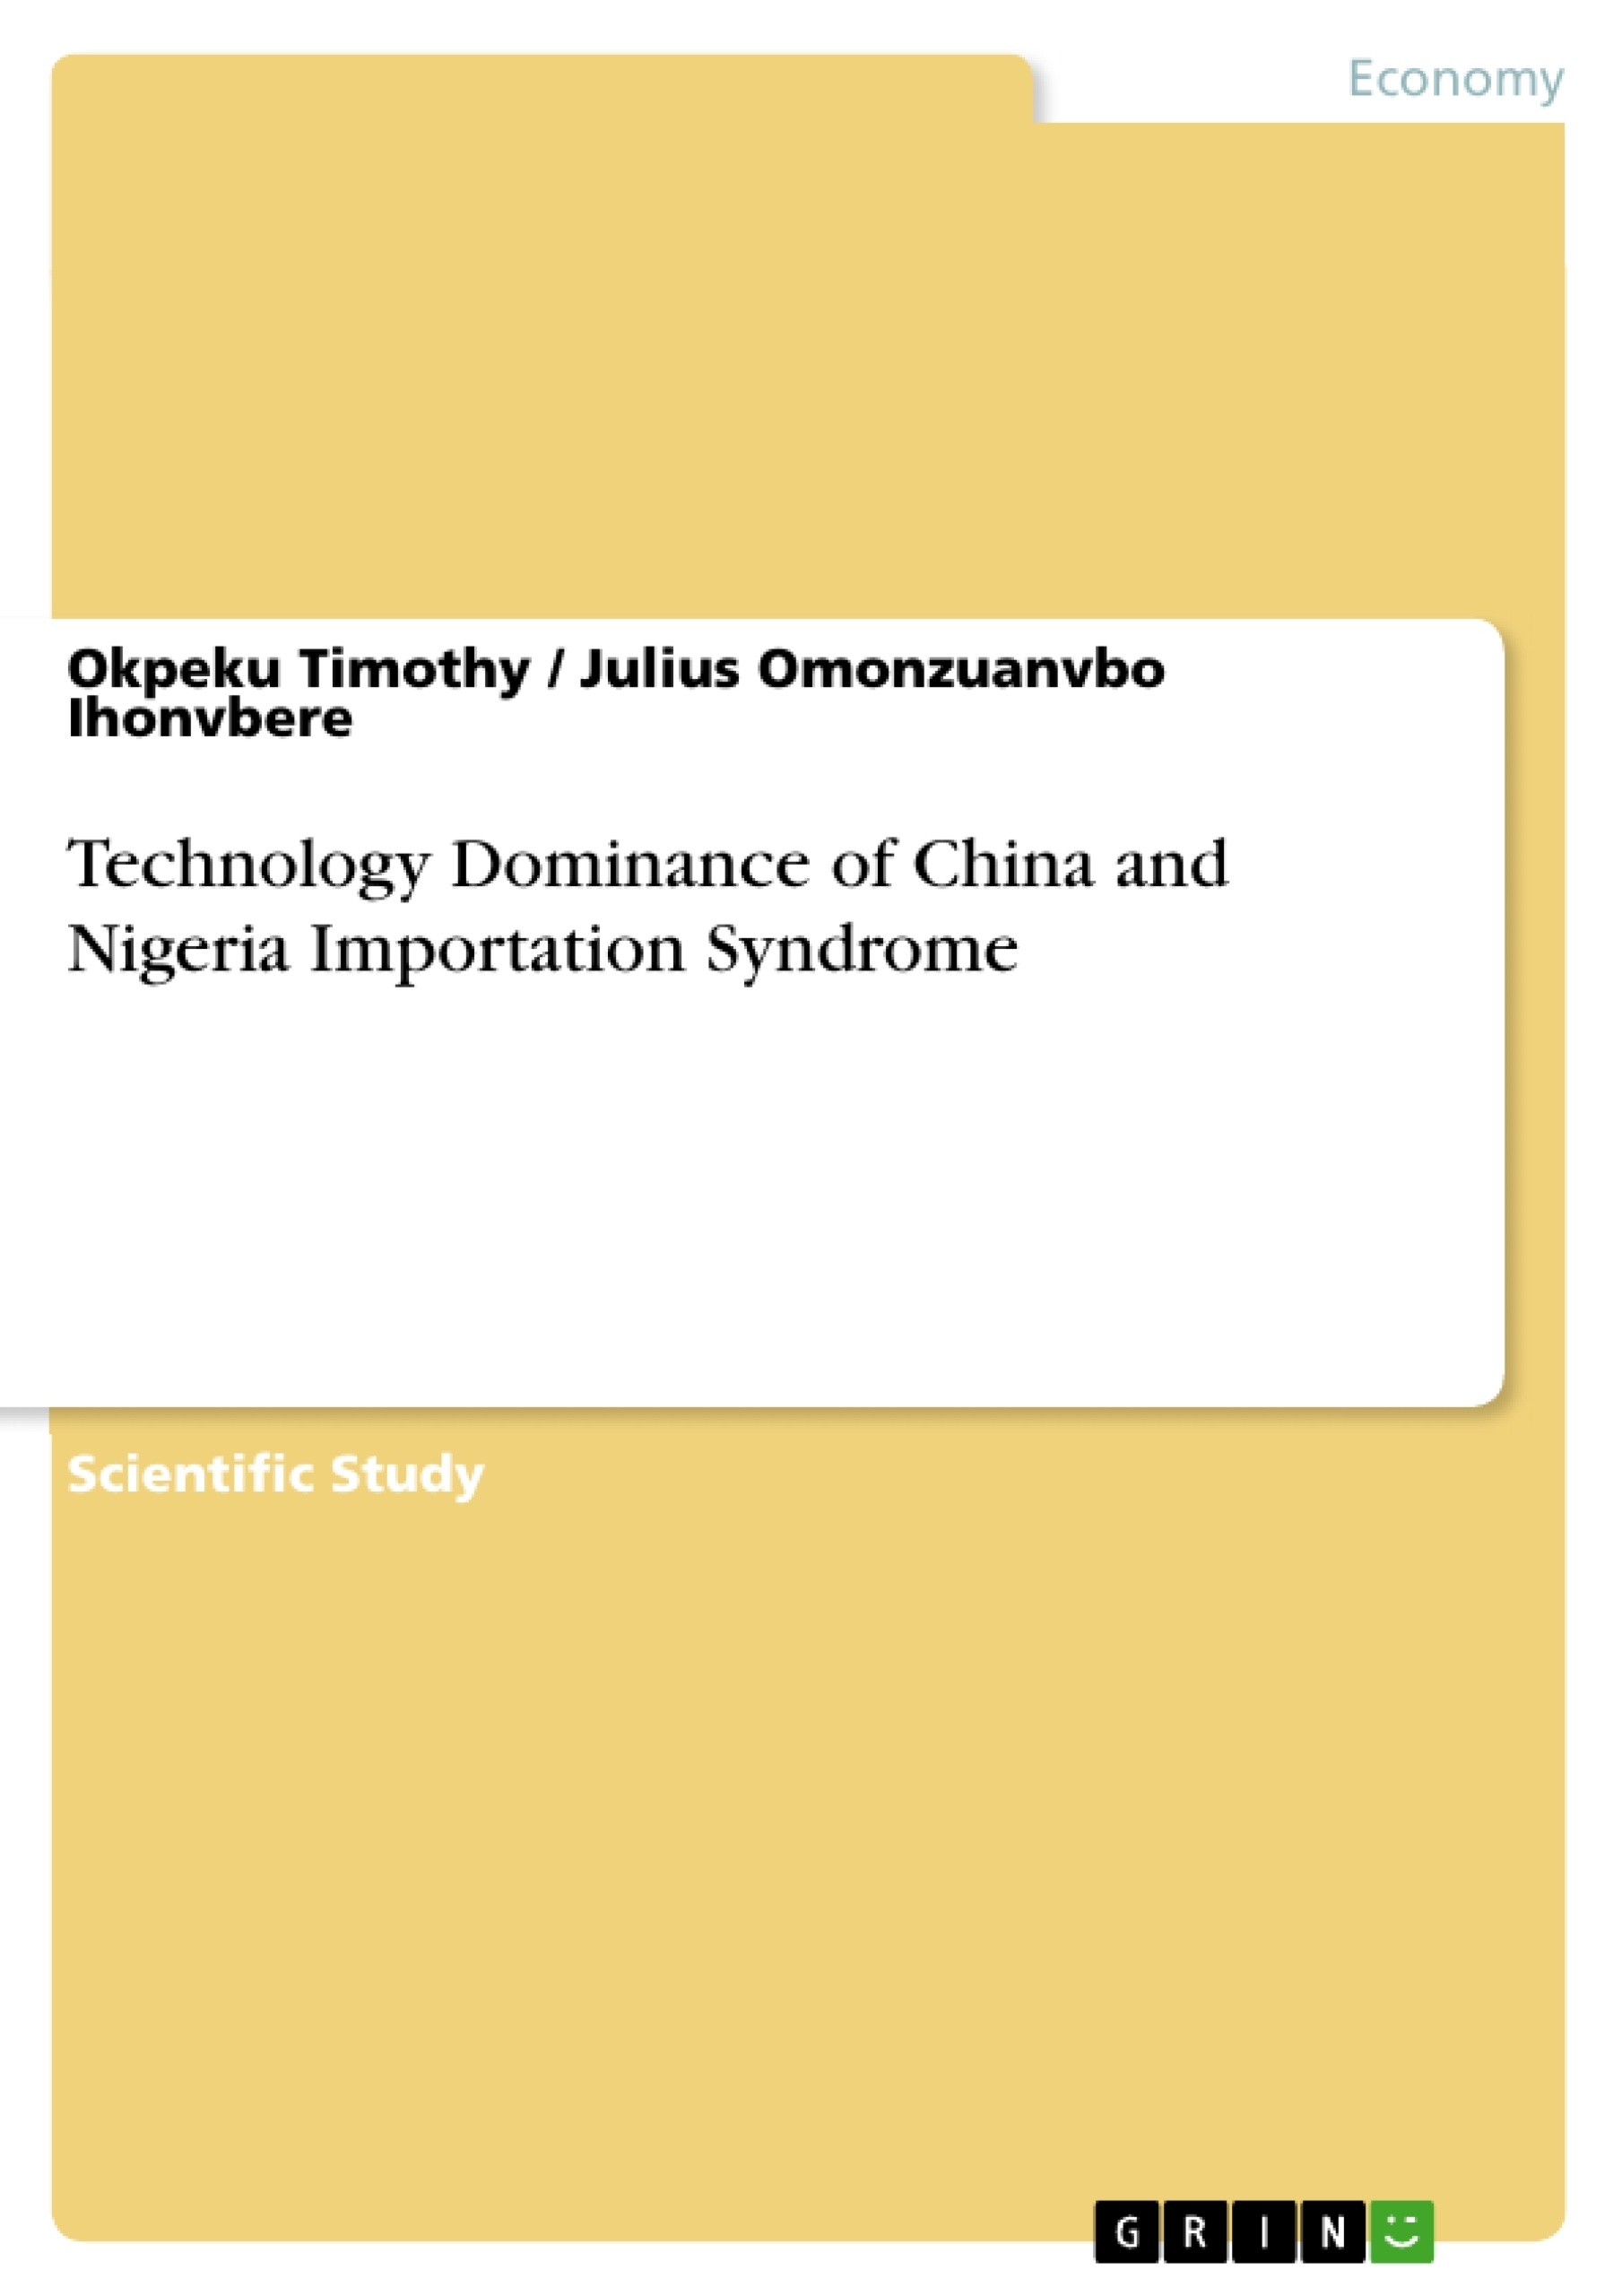 Title: Technology Dominance of China and Nigeria Importation Syndrome